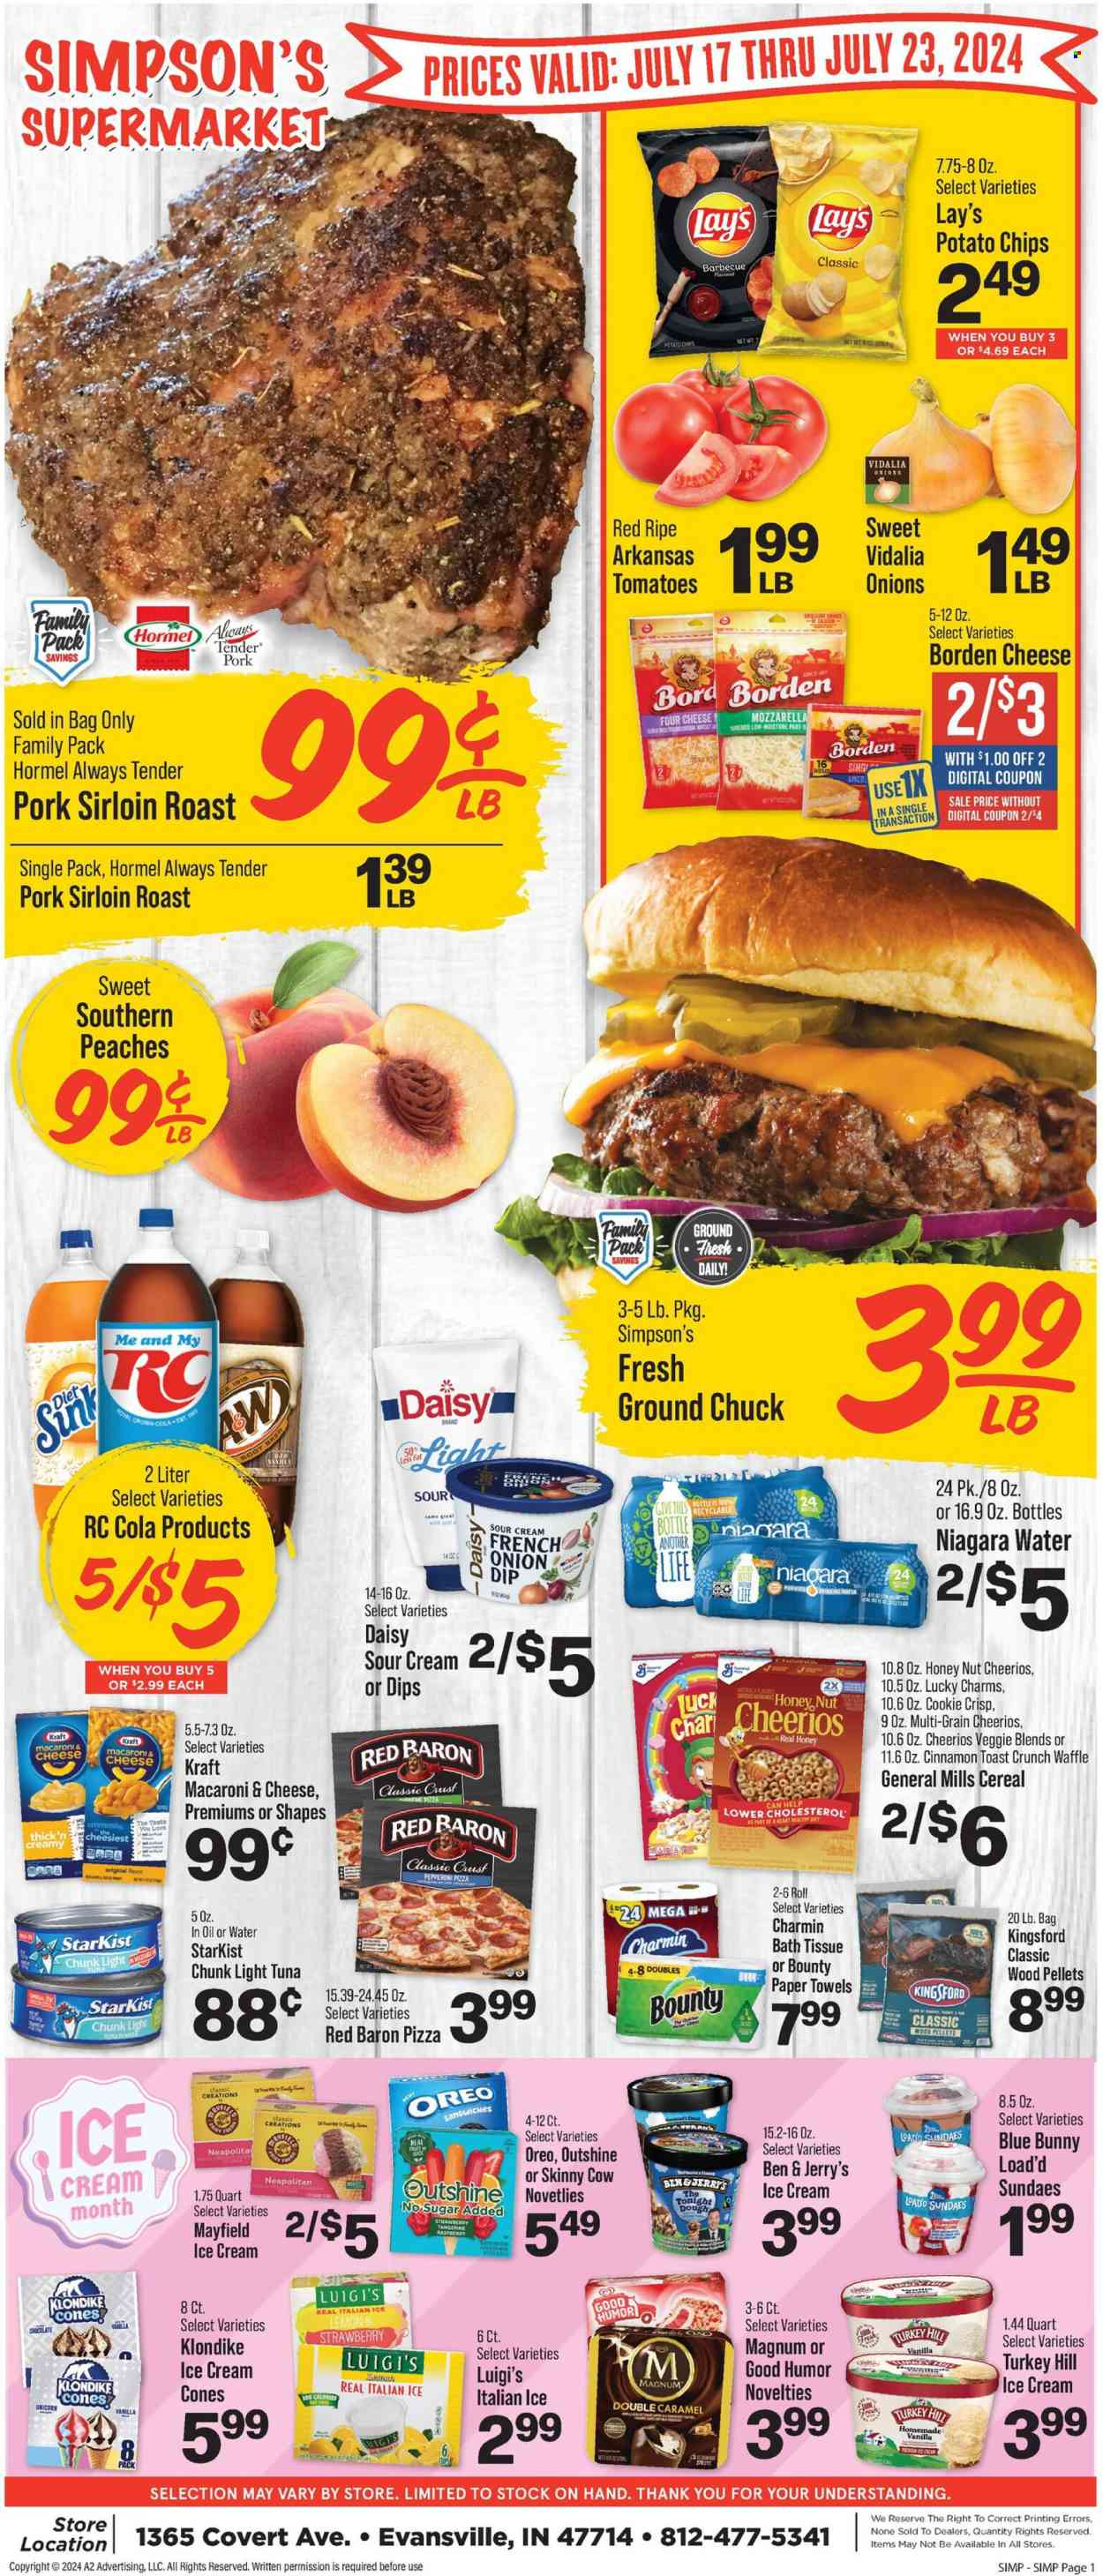 thumbnail - IGA Flyer - 07/17/2024 - 07/23/2024 - Sales products - mandarines, peaches, tuna, StarKist, macaroni & cheese, pasta, Kraft®, Hormel, Kingsford, roast, ready meal, Oreo, sour cream, dip, ice cream, Ben & Jerry's, Blue Bunny, ice cones, Red Baron, Bounty, General Mills, potato chips, Lay’s, canned tuna, light tuna, canned fish, cereals, Cheerios, juice, Royal Crown, bottled water, purified water, alcohol, beer, ground beef, ground chuck, pork loin, bath tissue, kitchen towels, paper towels, Charmin, Omega-3. Page 1.